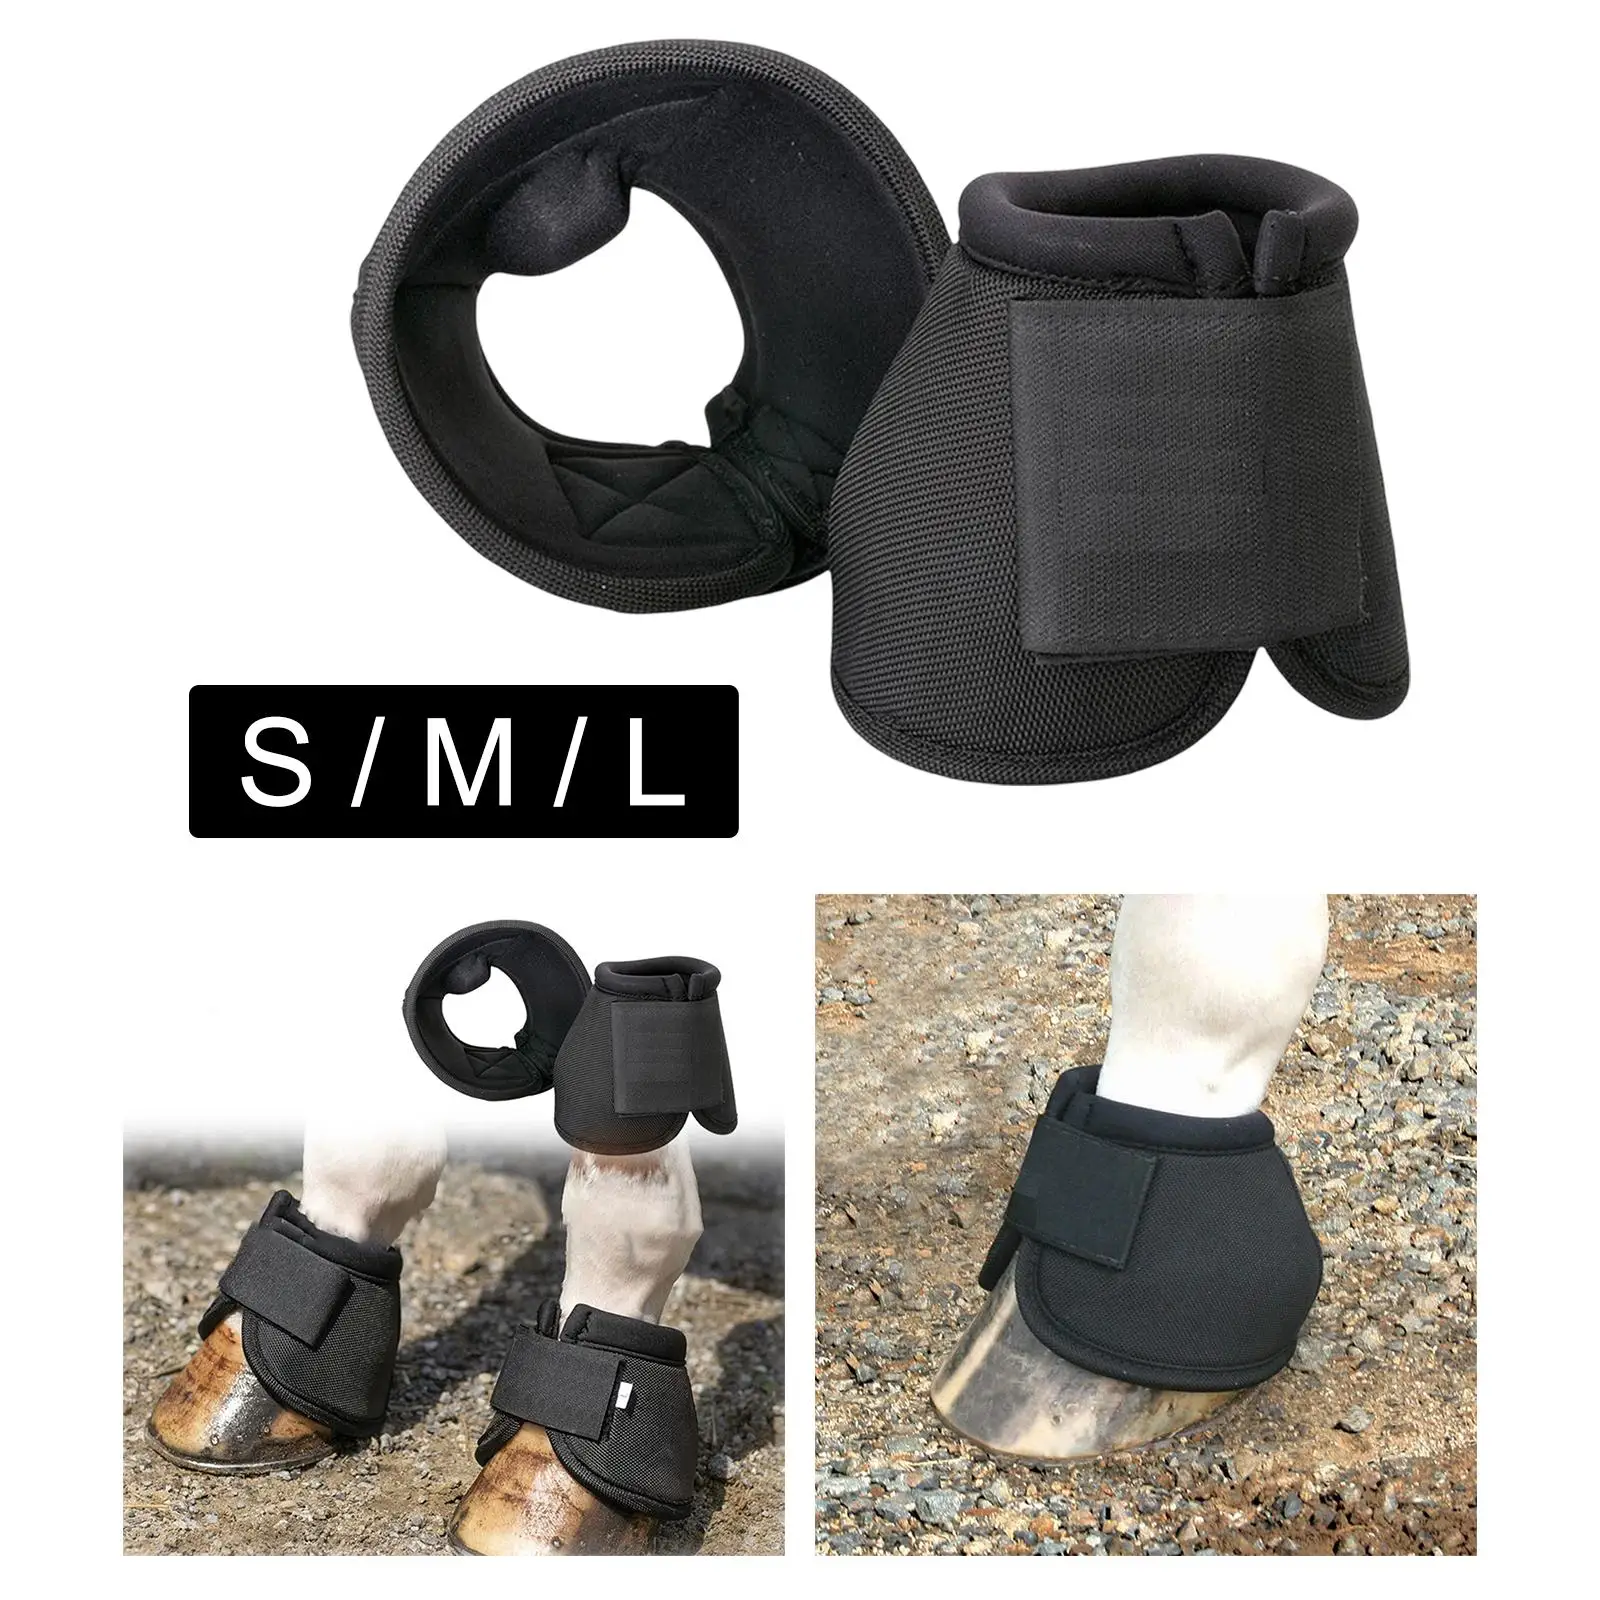 Durable Rubber Horse Bell Boot Quick Drying Shock Absorbing Maximum Protection and Comfort Heavy Duty Strengthen for Pair